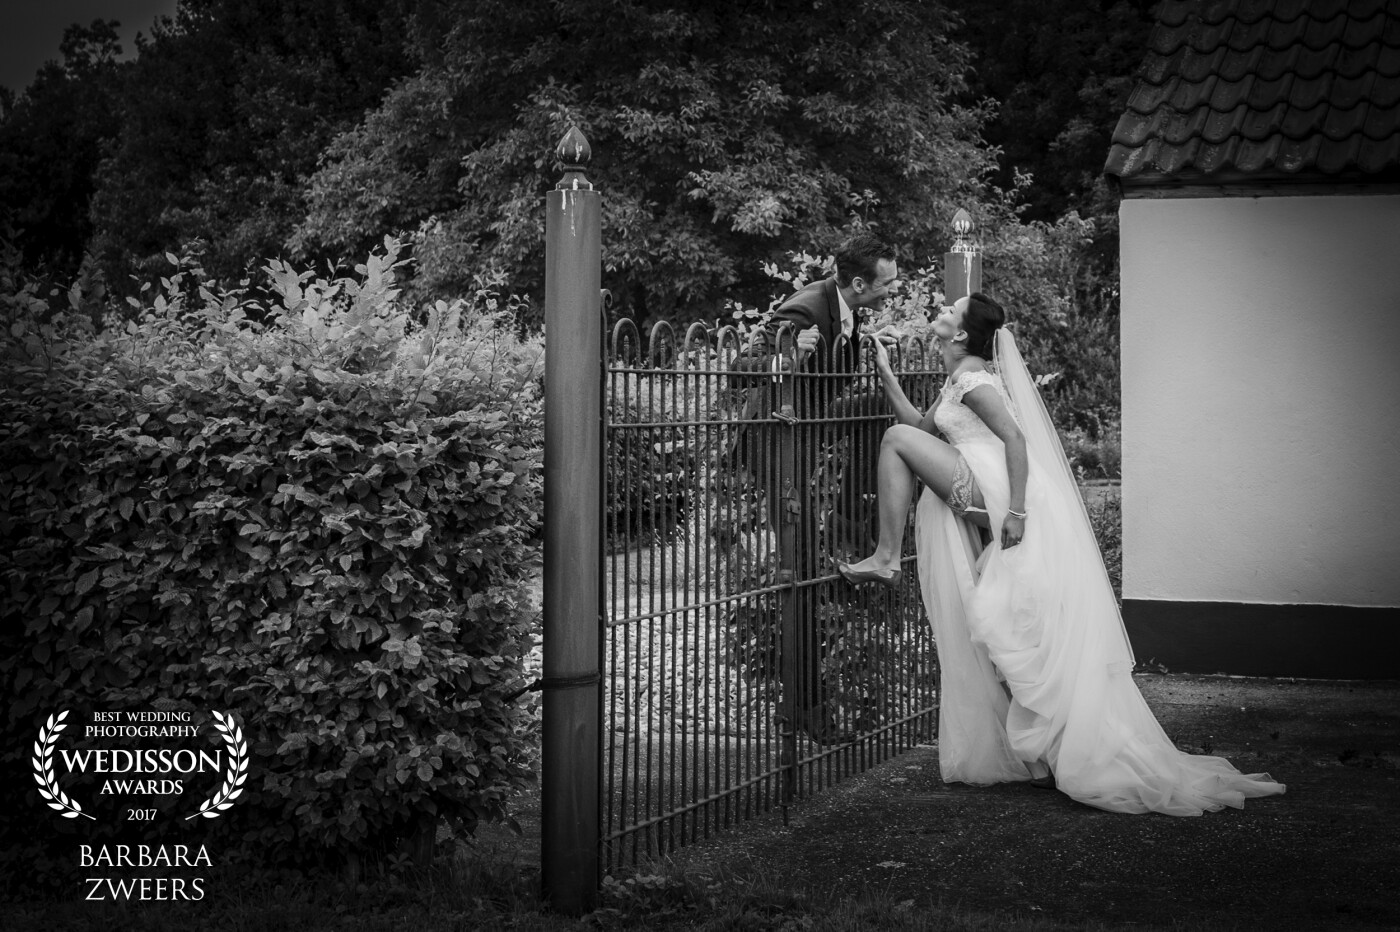 Nico and Mariella got married in the beautiful Netherlands. Instead of having a traditional pose I asked him to catch her from bihind the fence. She lifted her leg and so I got this beautiful scene. Love them! 